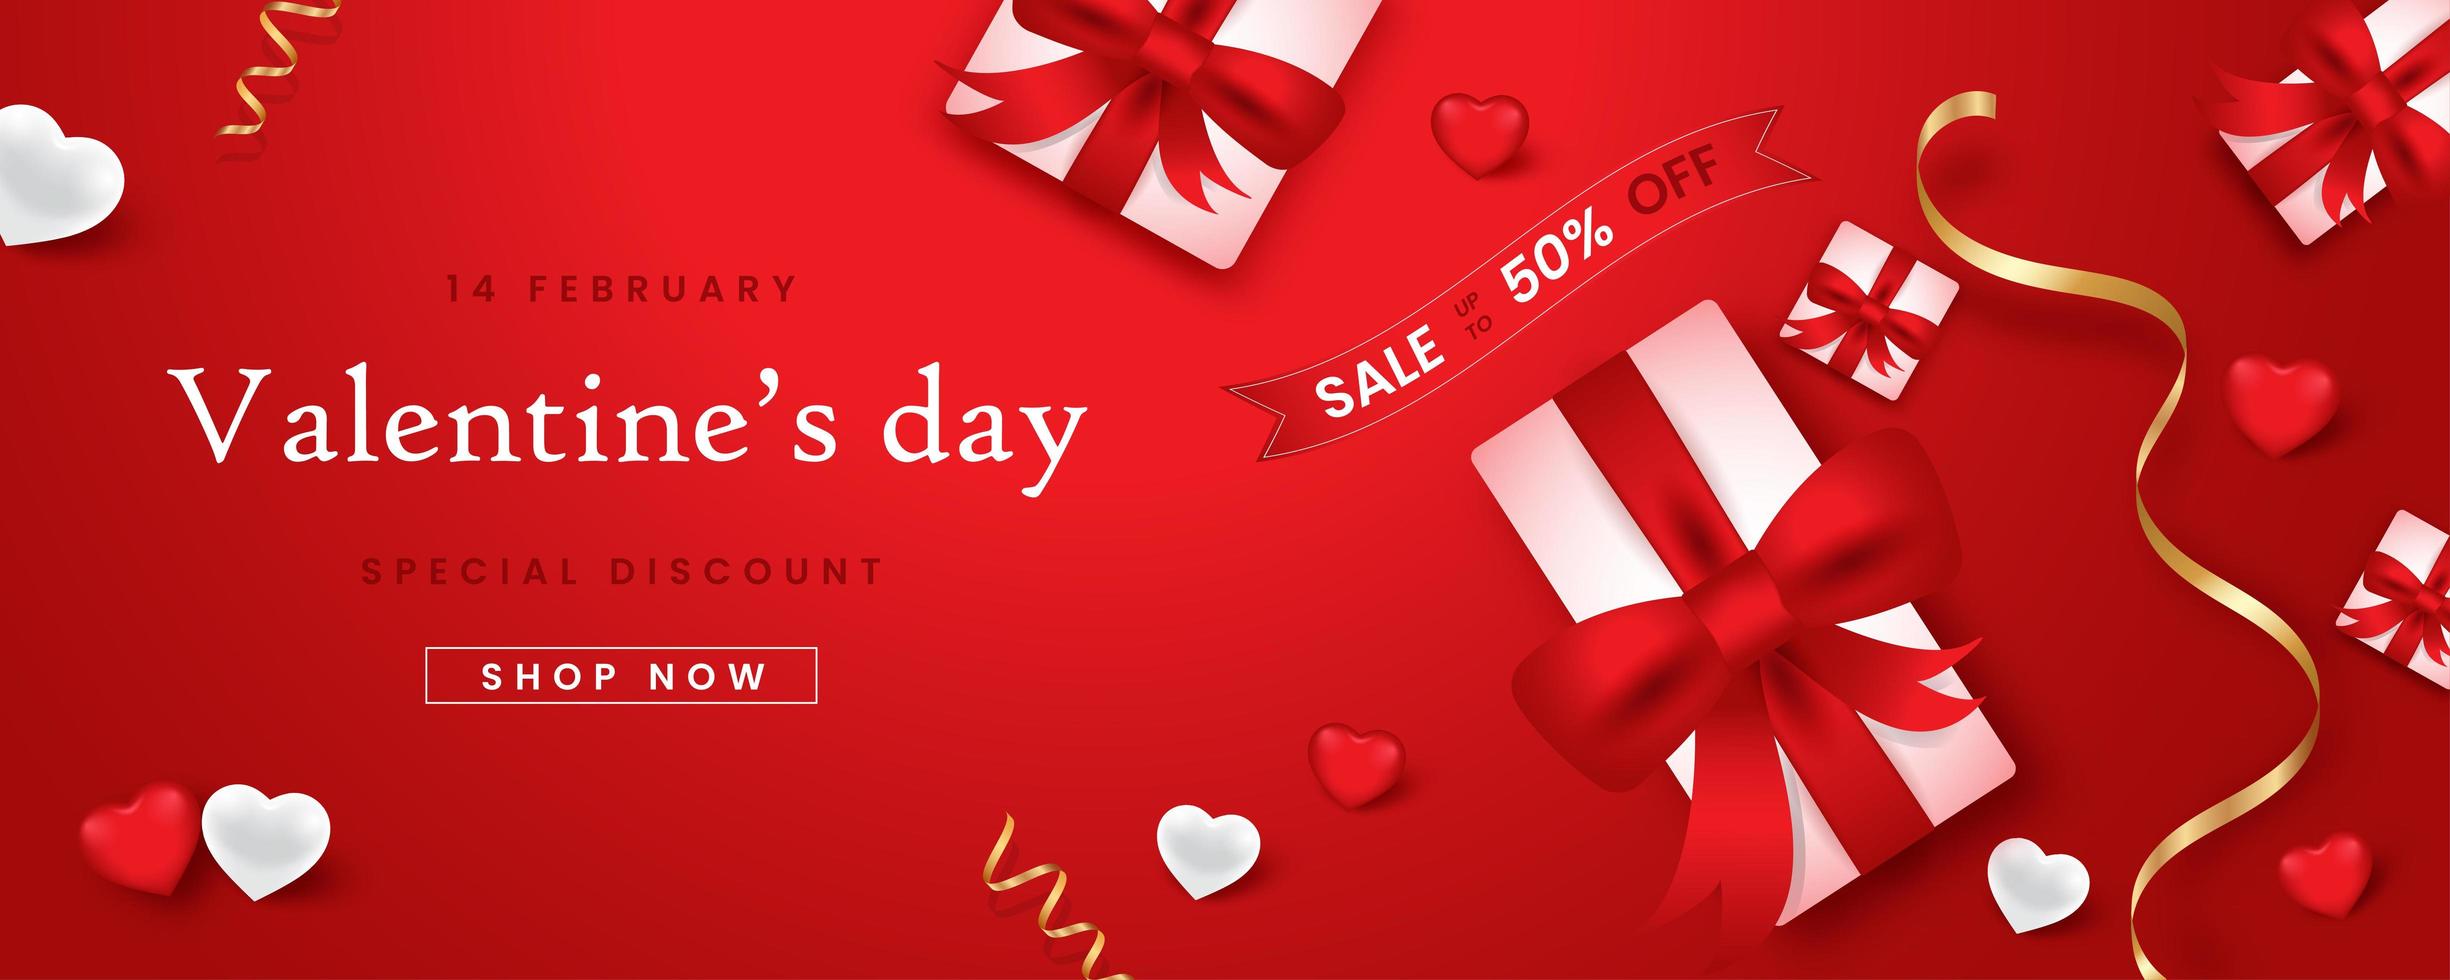 Promo Web Banner for Valentine's Day Sale. Beautiful Background with Red Fabric color. vector